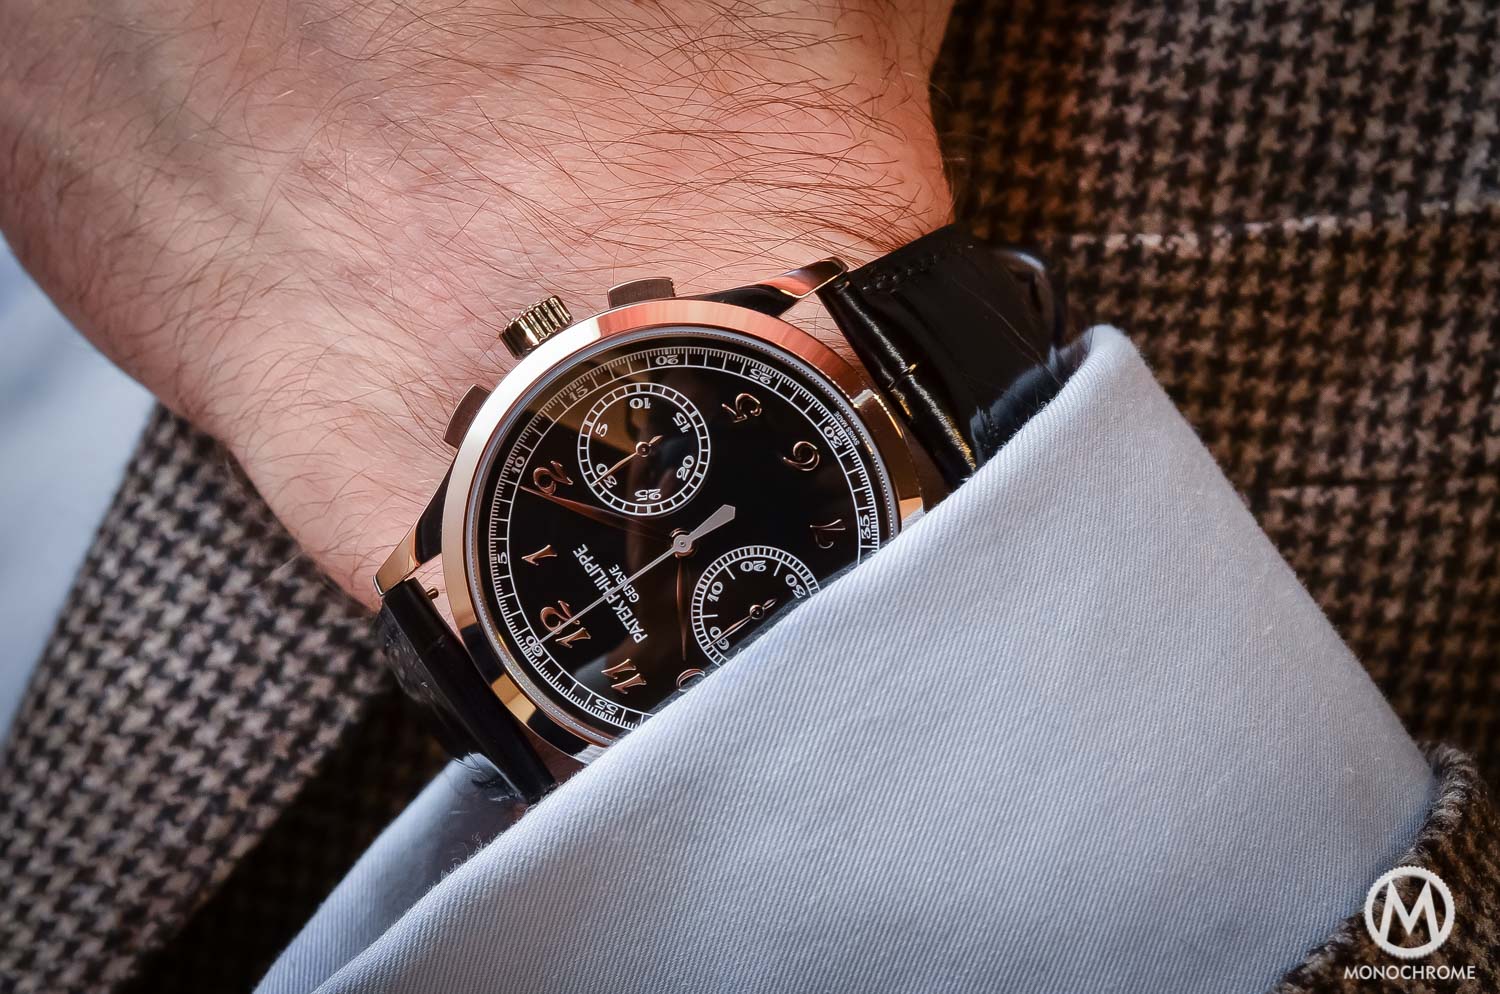 Patek Philippe 5170g-010 Chronograph - review - on the wrist